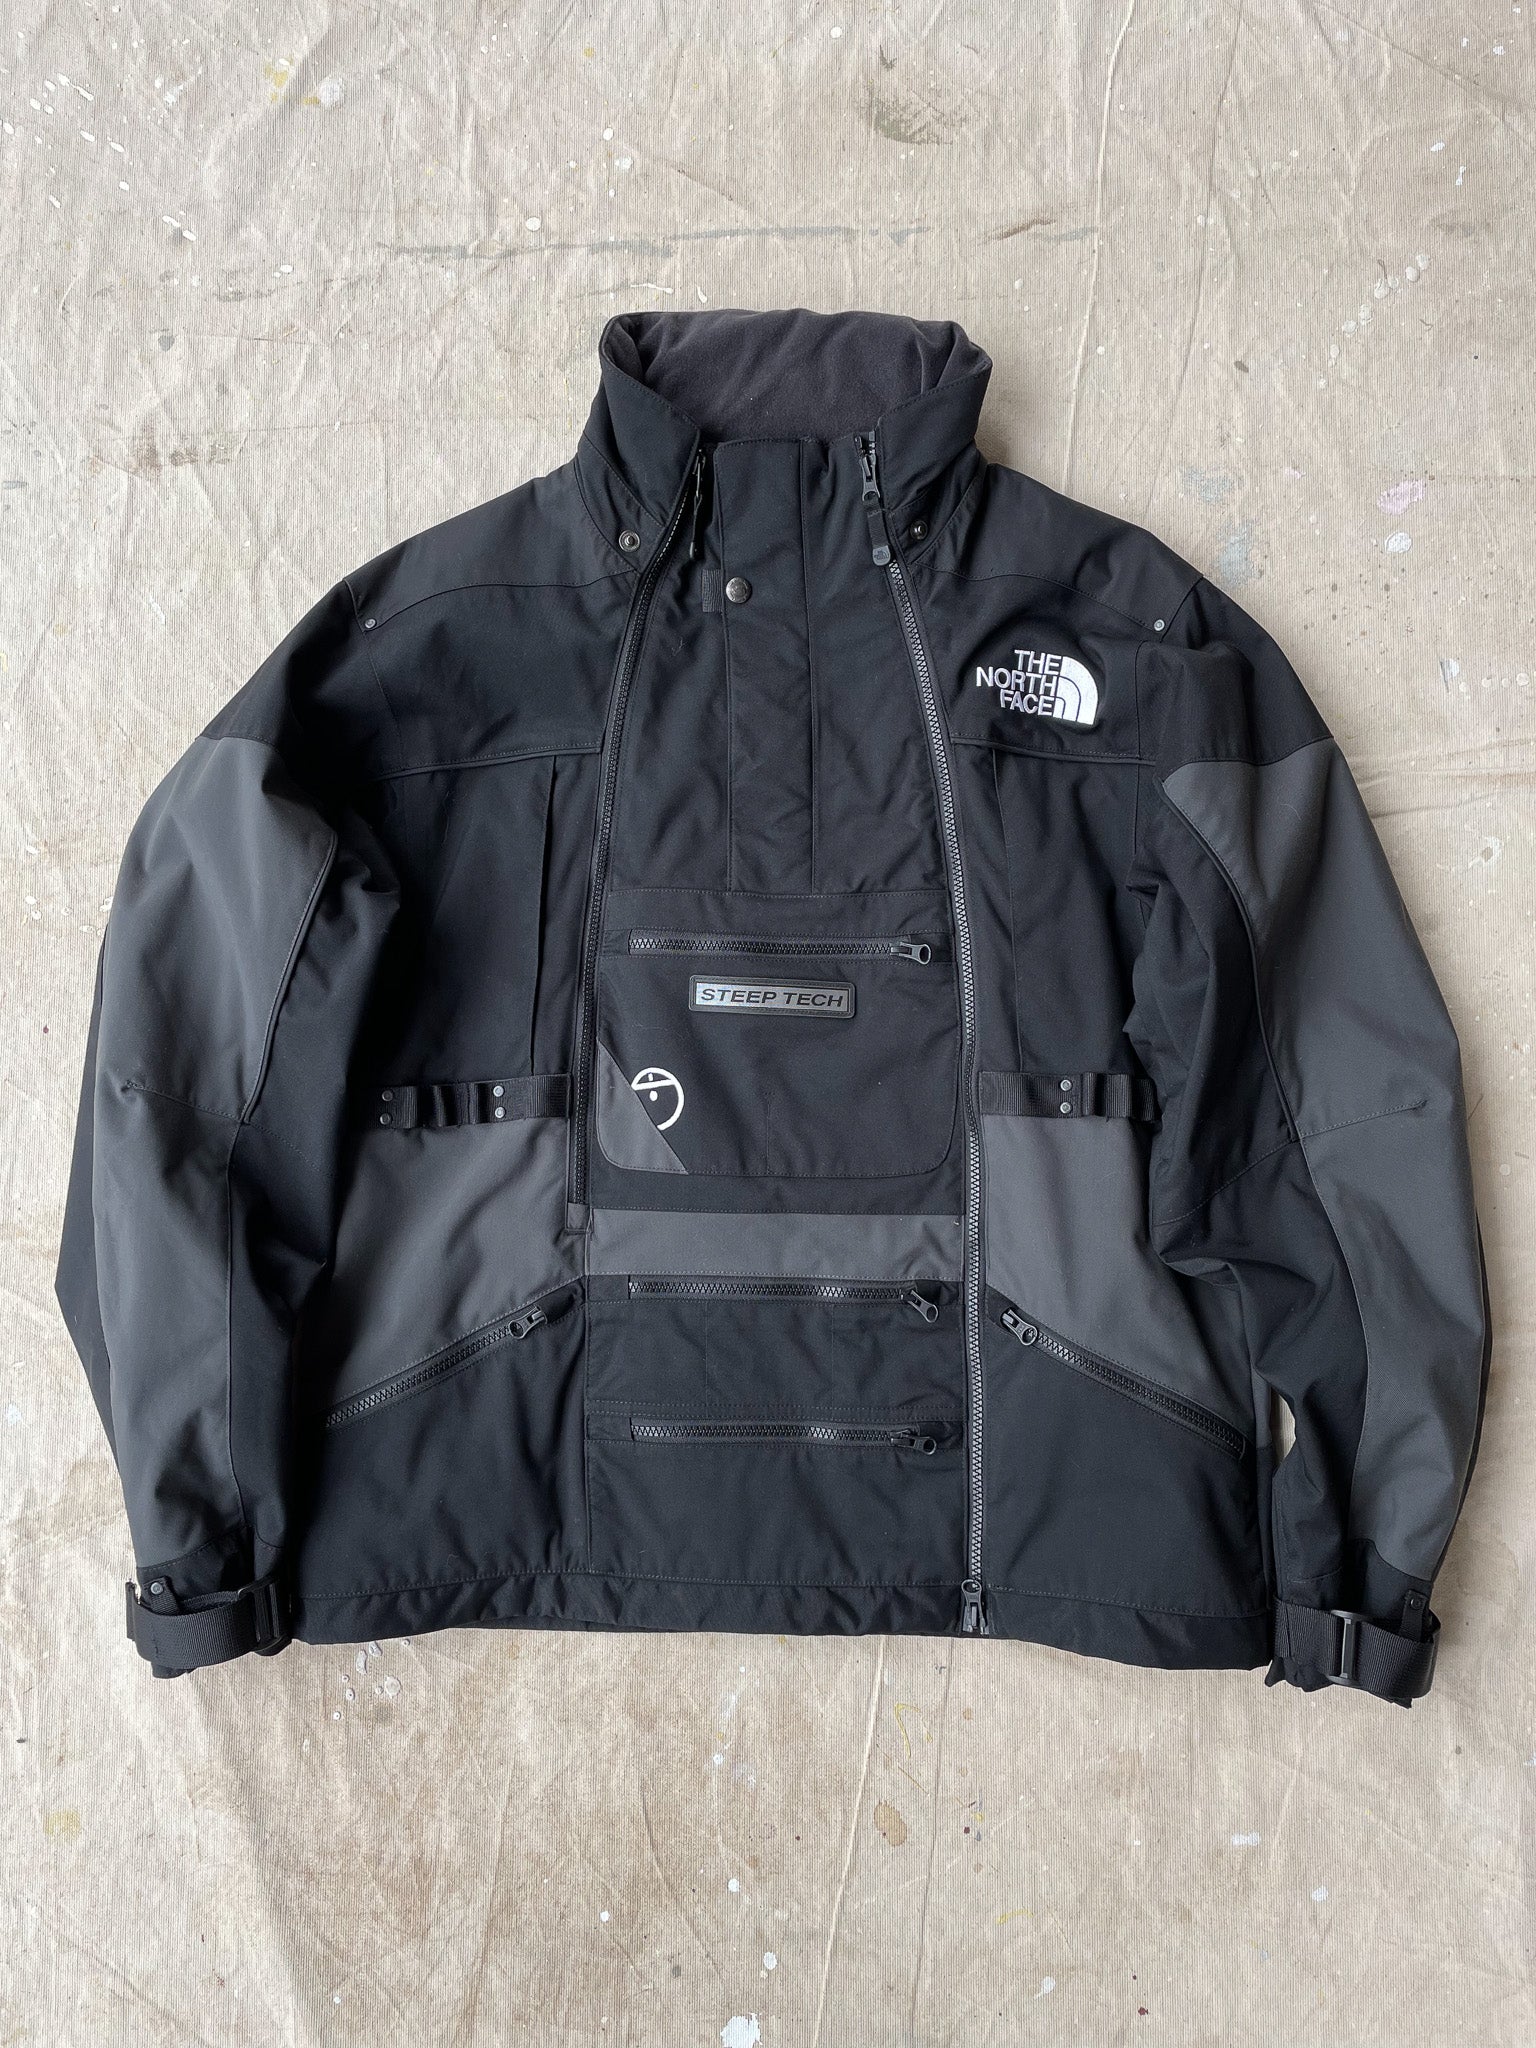 THE NORTH FACE STEEP TECH JACKET—BLACK [M]